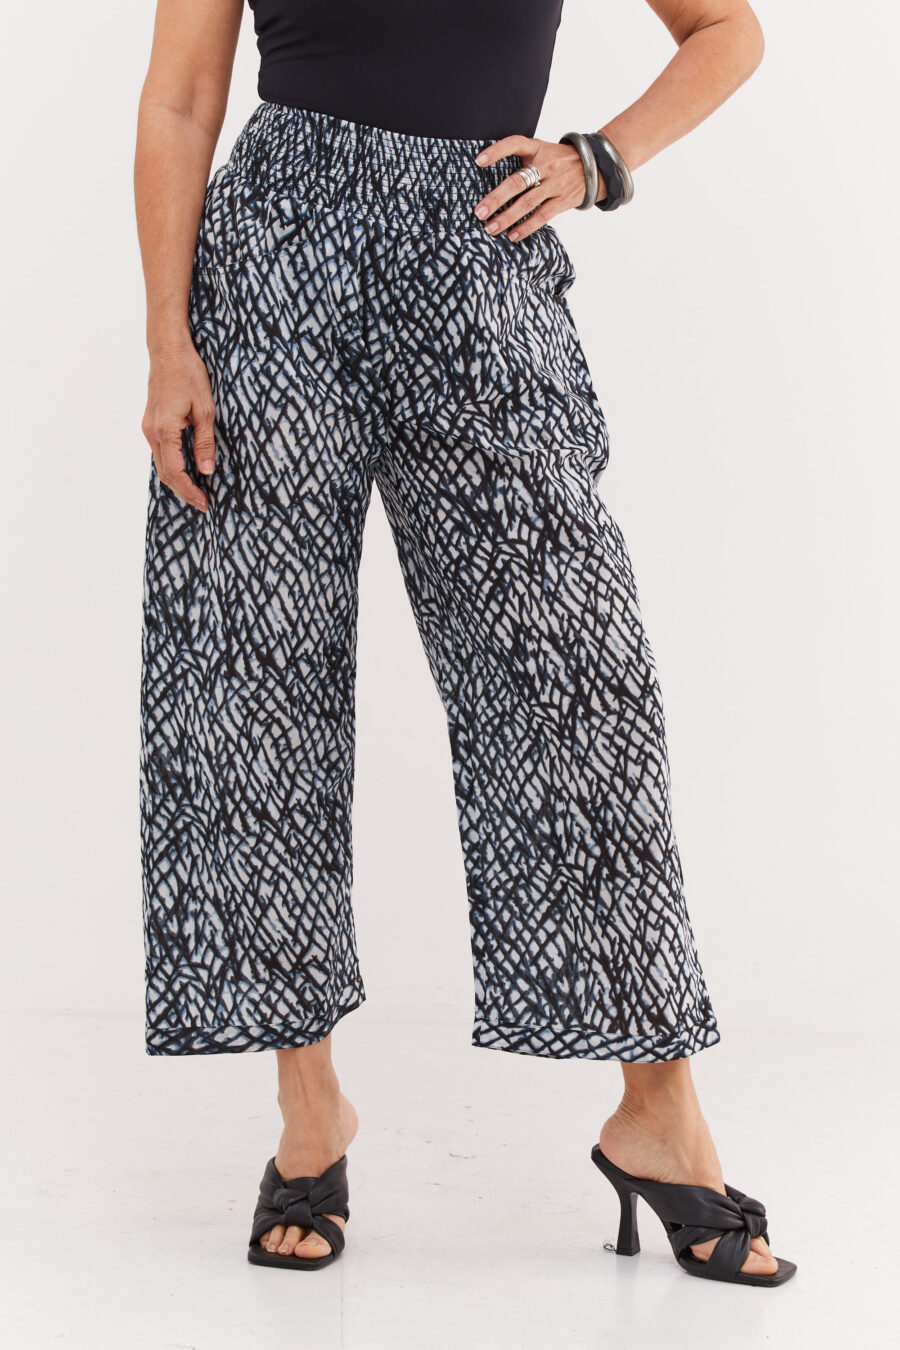 Harmony pants | Flattering and comfortable pants – Black crush print, white pants with black and light blue mesh print by Comfort Zone Boutique